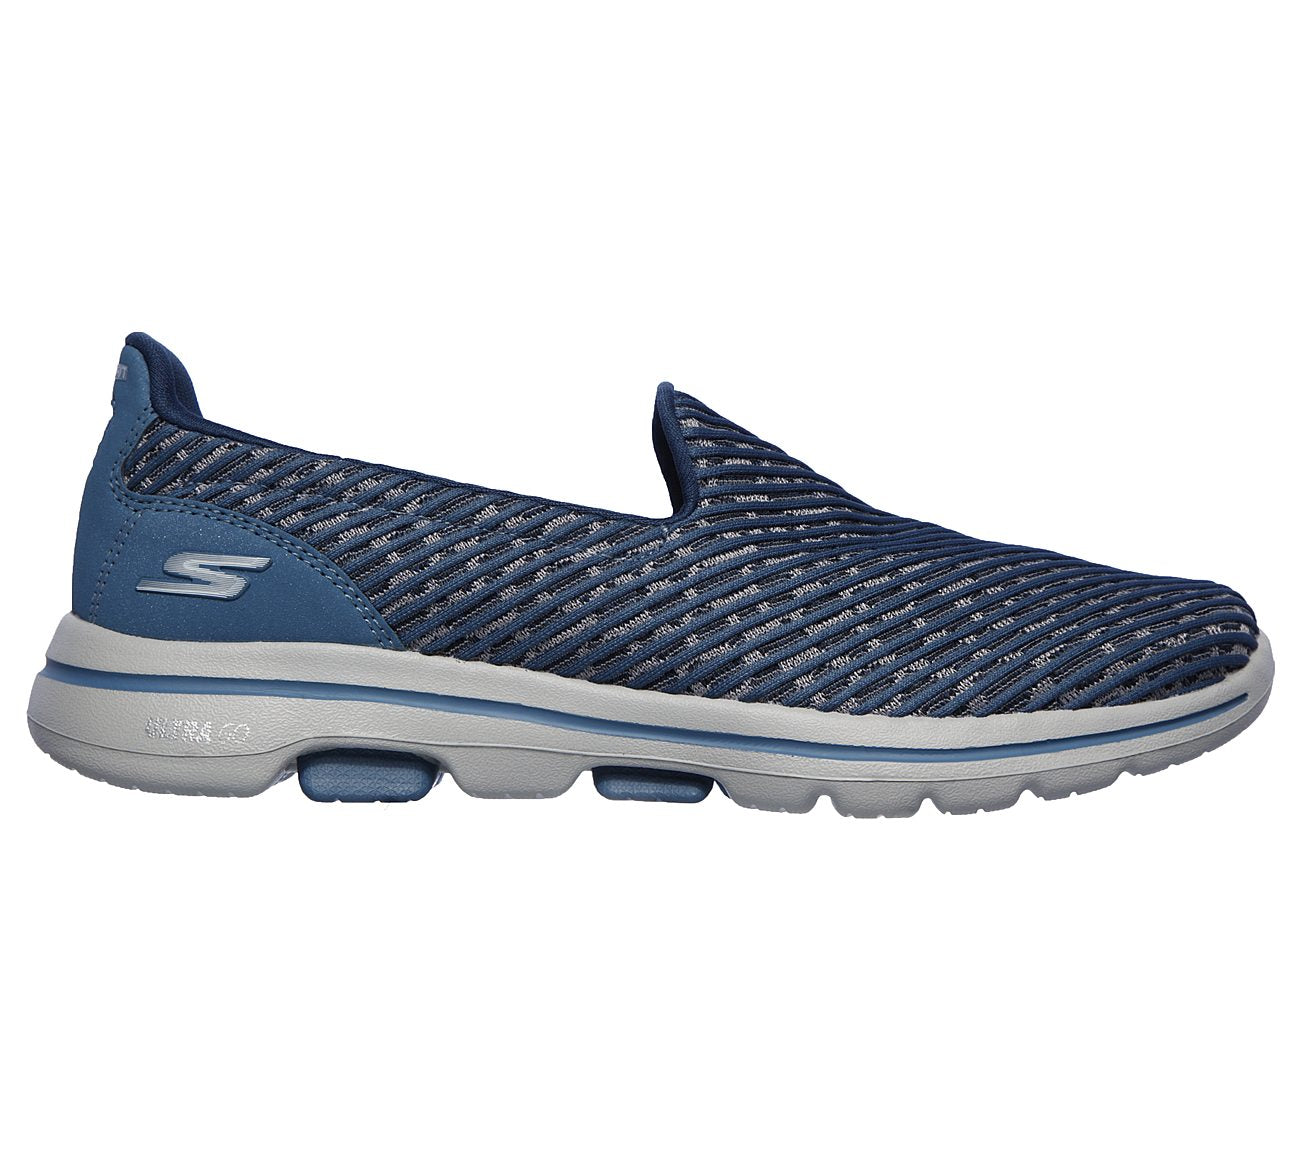 Skechers Go Walk 5 Miracle Shoes For Women, Blue